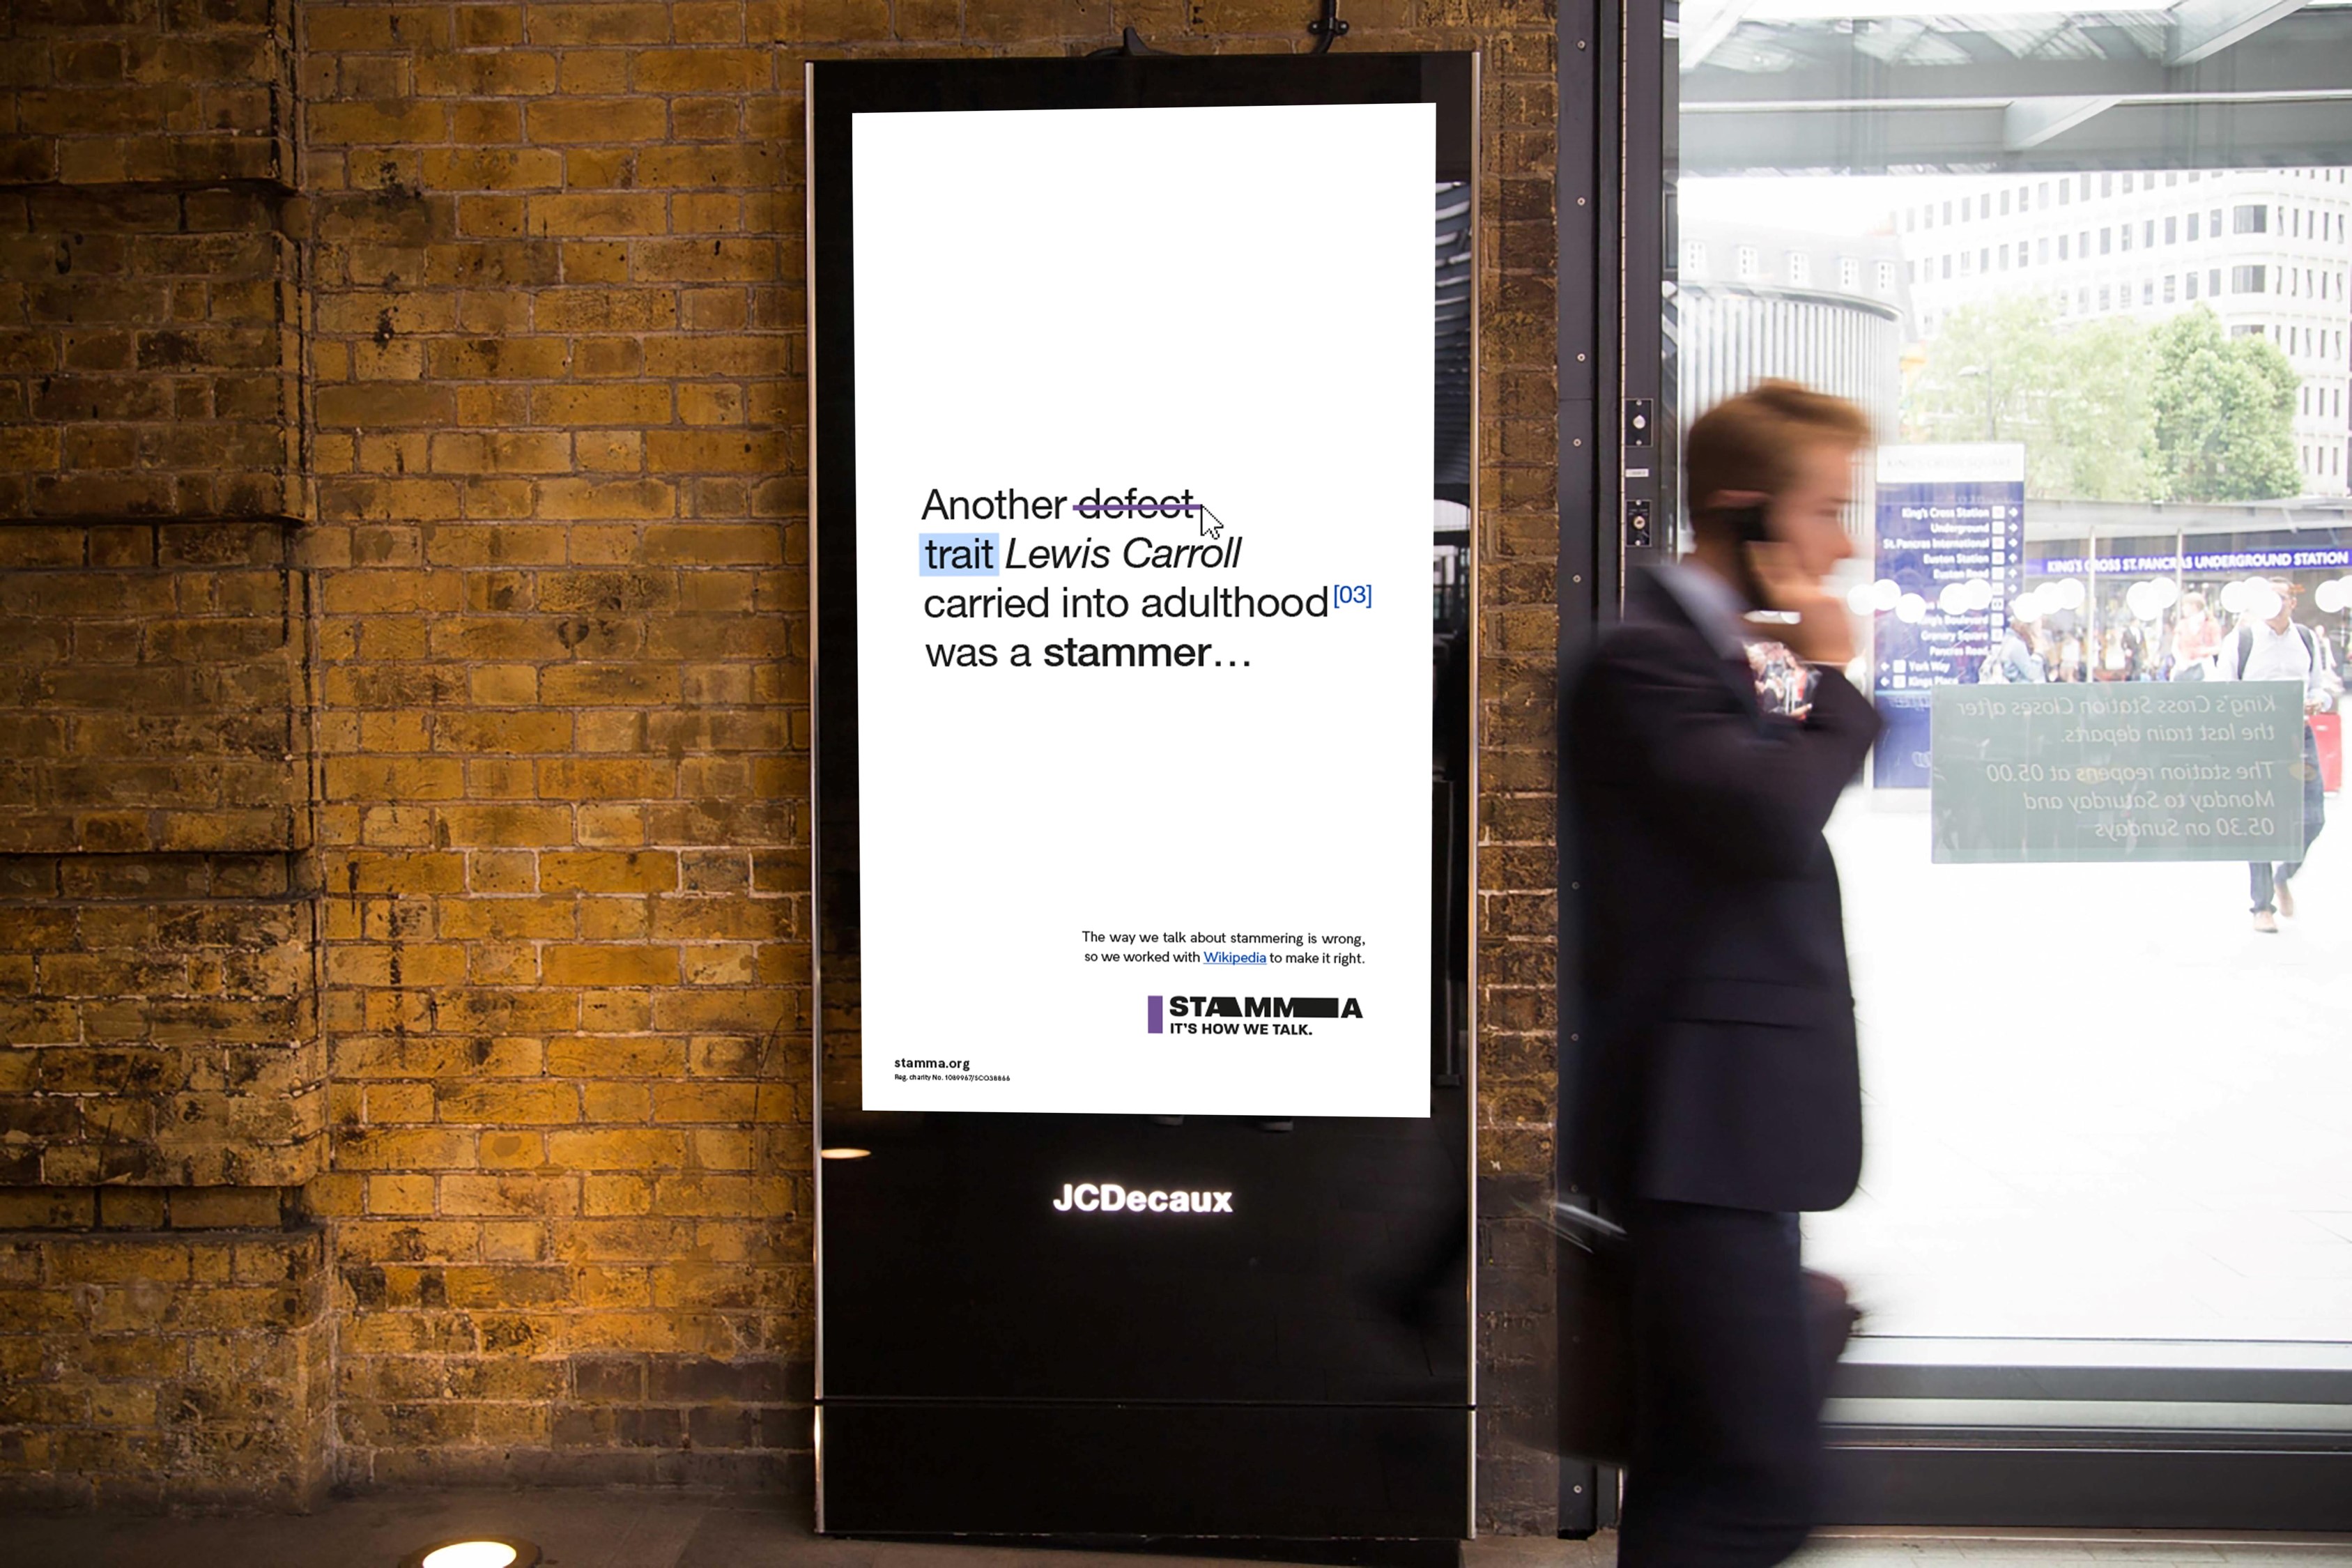 An advertisement for the Find the Right Words campaign